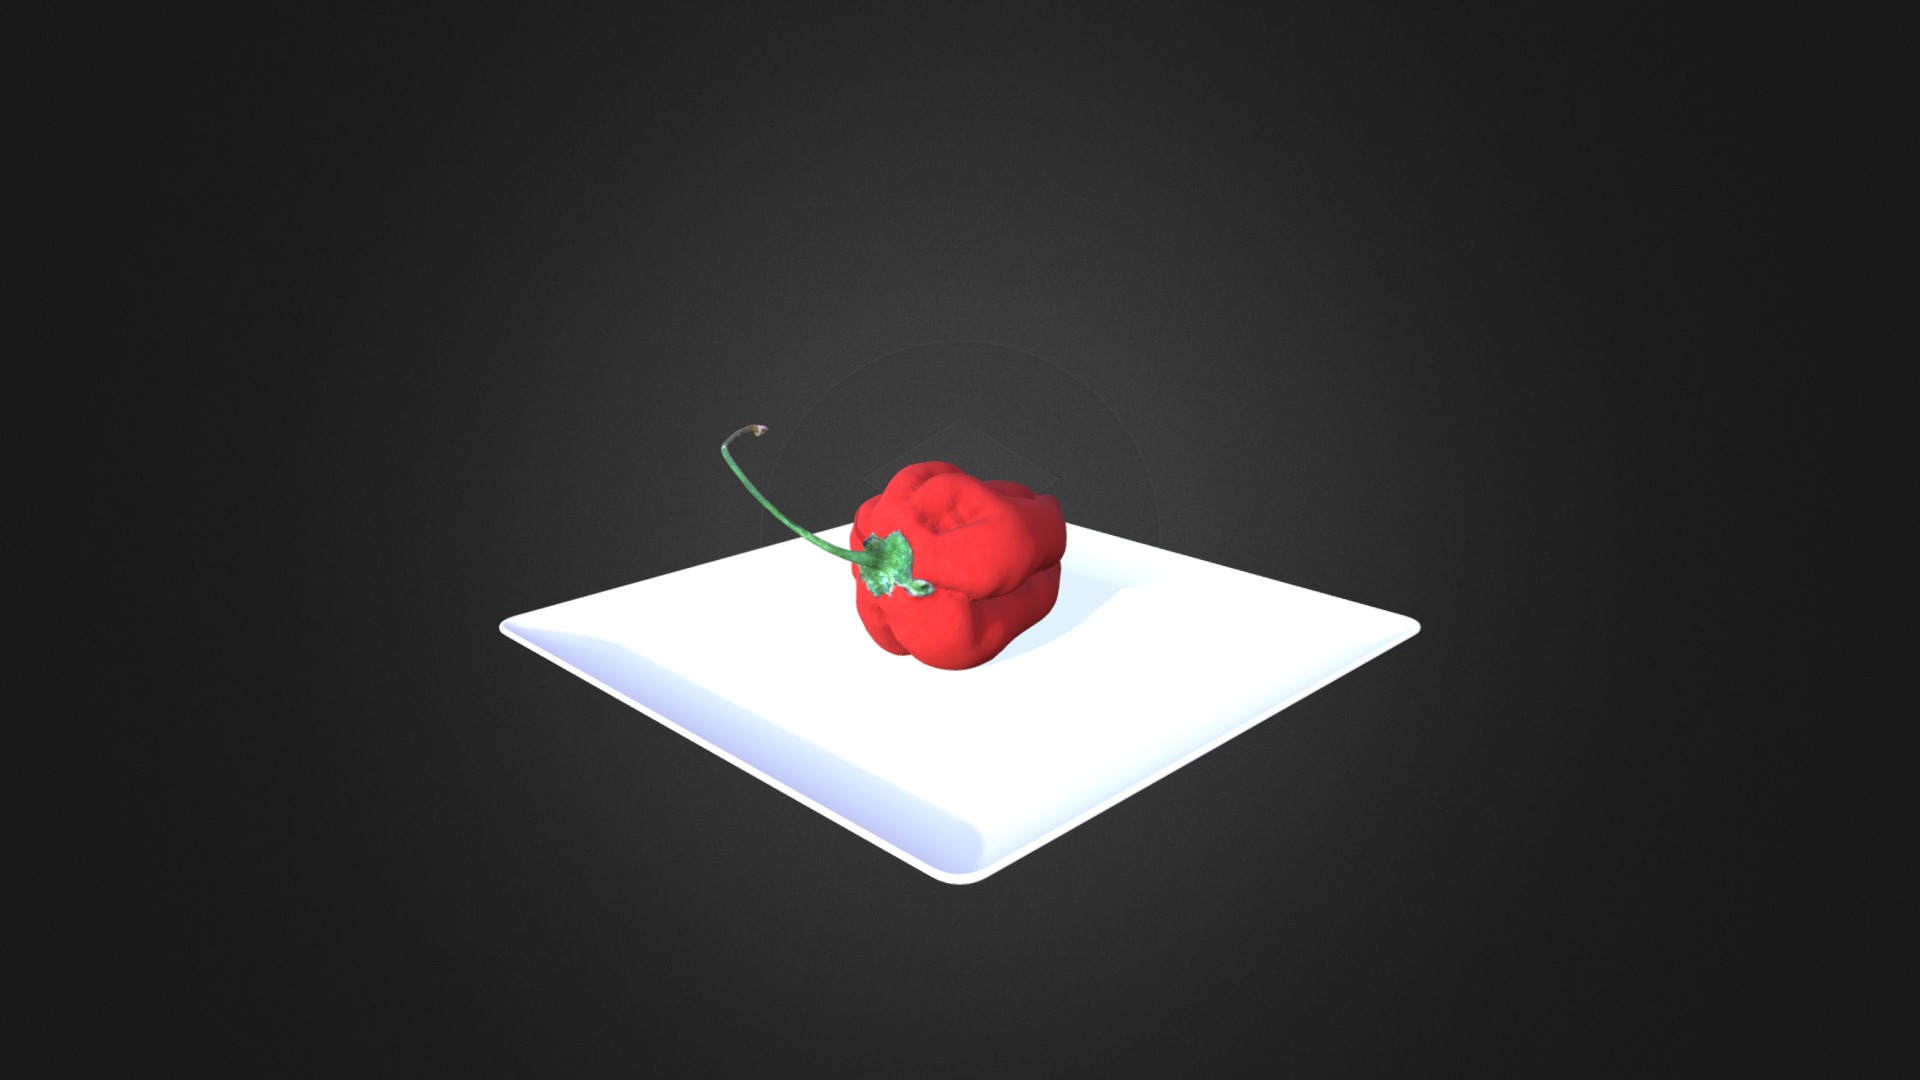 3D model Habanero Chilli on White Plate - This is a 3D model of the Habanero Chilli on White Plate. The 3D model is about a red rose on a white paper.